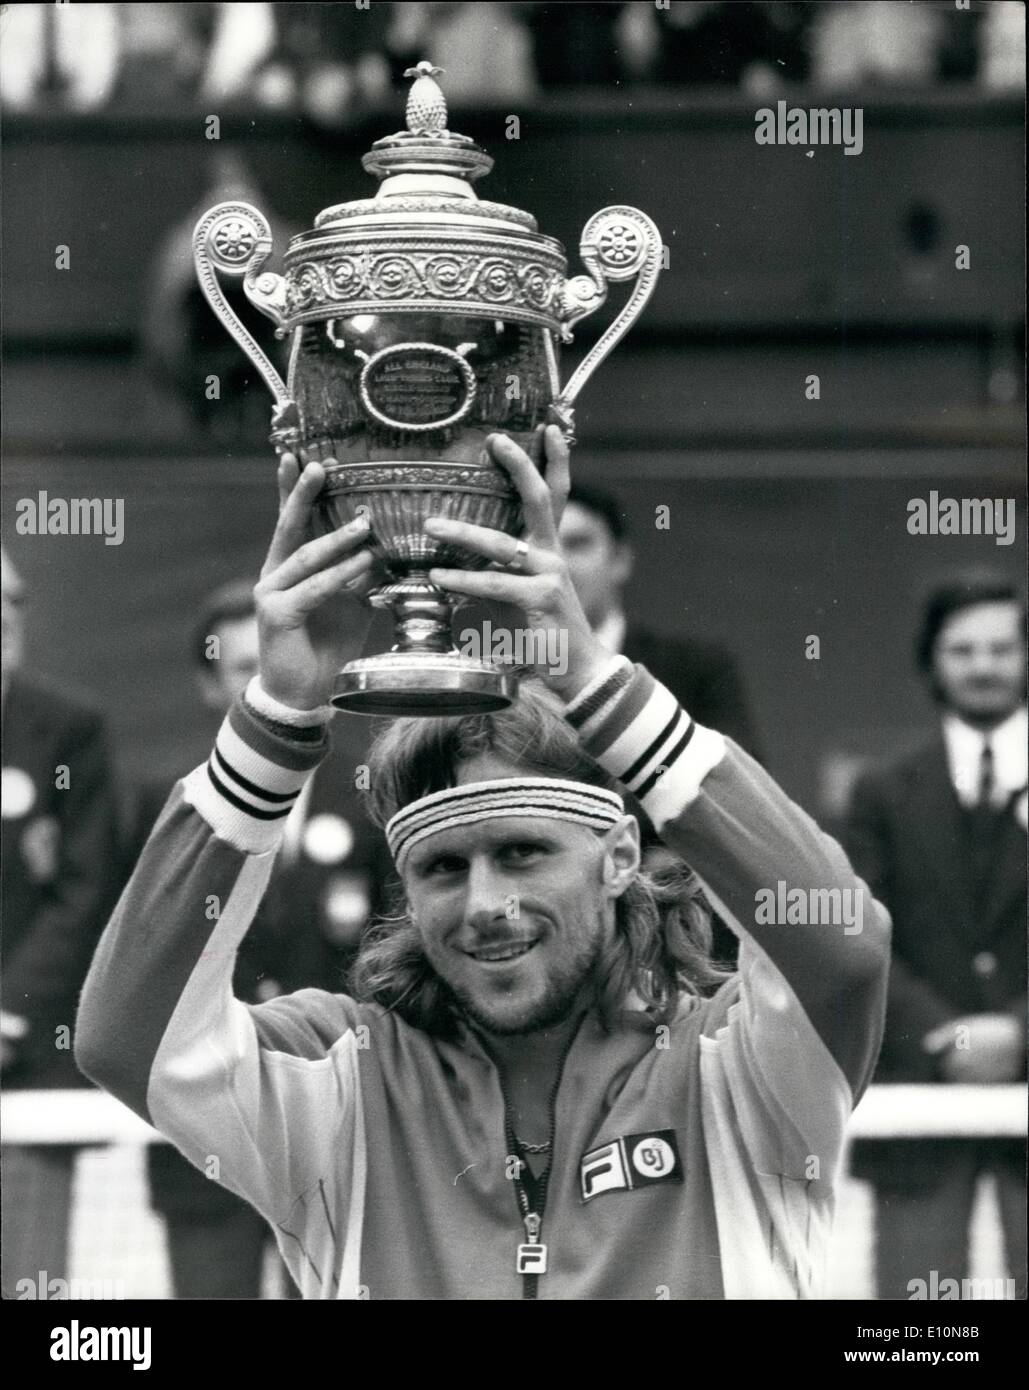 Jul. 07, 1973 - Bjorn Borg Wins The Wimbledon Title For The Third Time Running To Equal Fred Perry's Record; Today on the centre court at Wimbledon Bjorn Borg won the men's singles title by beating Jimmy Conlor 6-2 6-2 6-2. This makes it three on a row for Borg making him only the second player in the history of the game to do this, the other is the famous Fred Perry. Photo Shows Bjorn Borg holds up trophy on the centre court at Wimbledon this afternoon after beating Jimmy Connors 6-2 6-2 6-3. Stock Photo